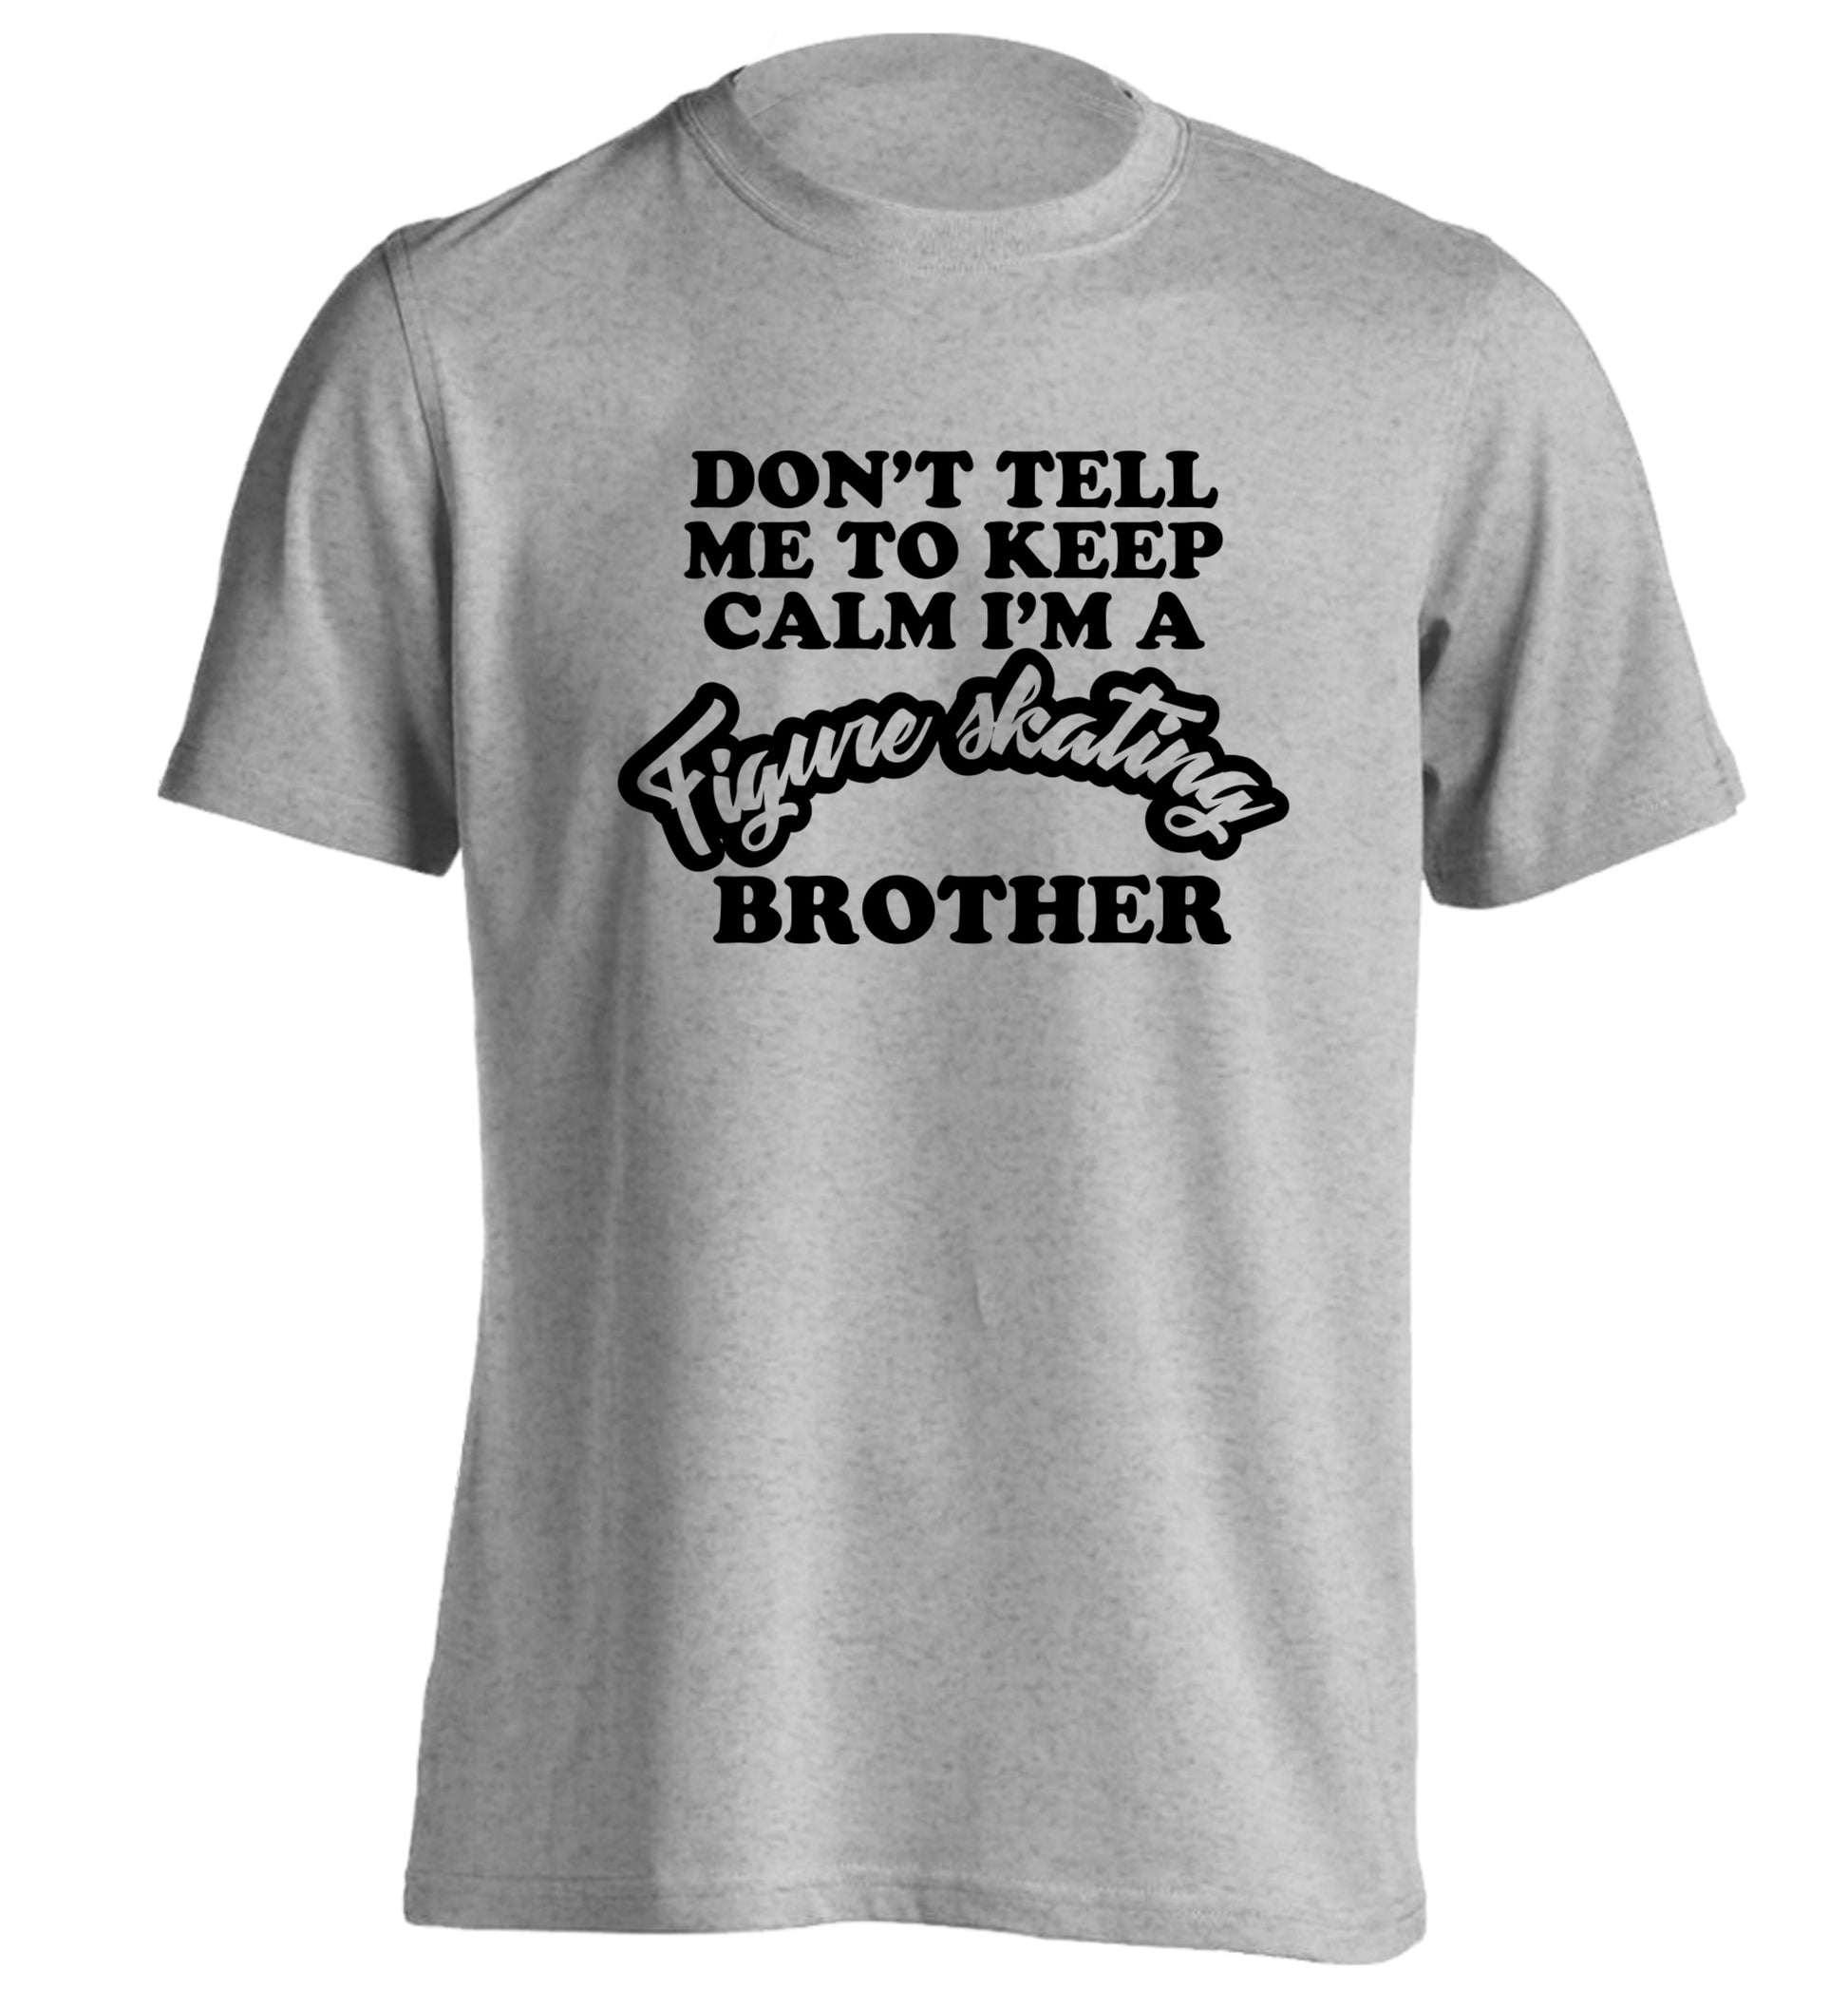 Don't tell me to keep calm I'm a figure skating brother adults unisexgrey Tshirt 2XL